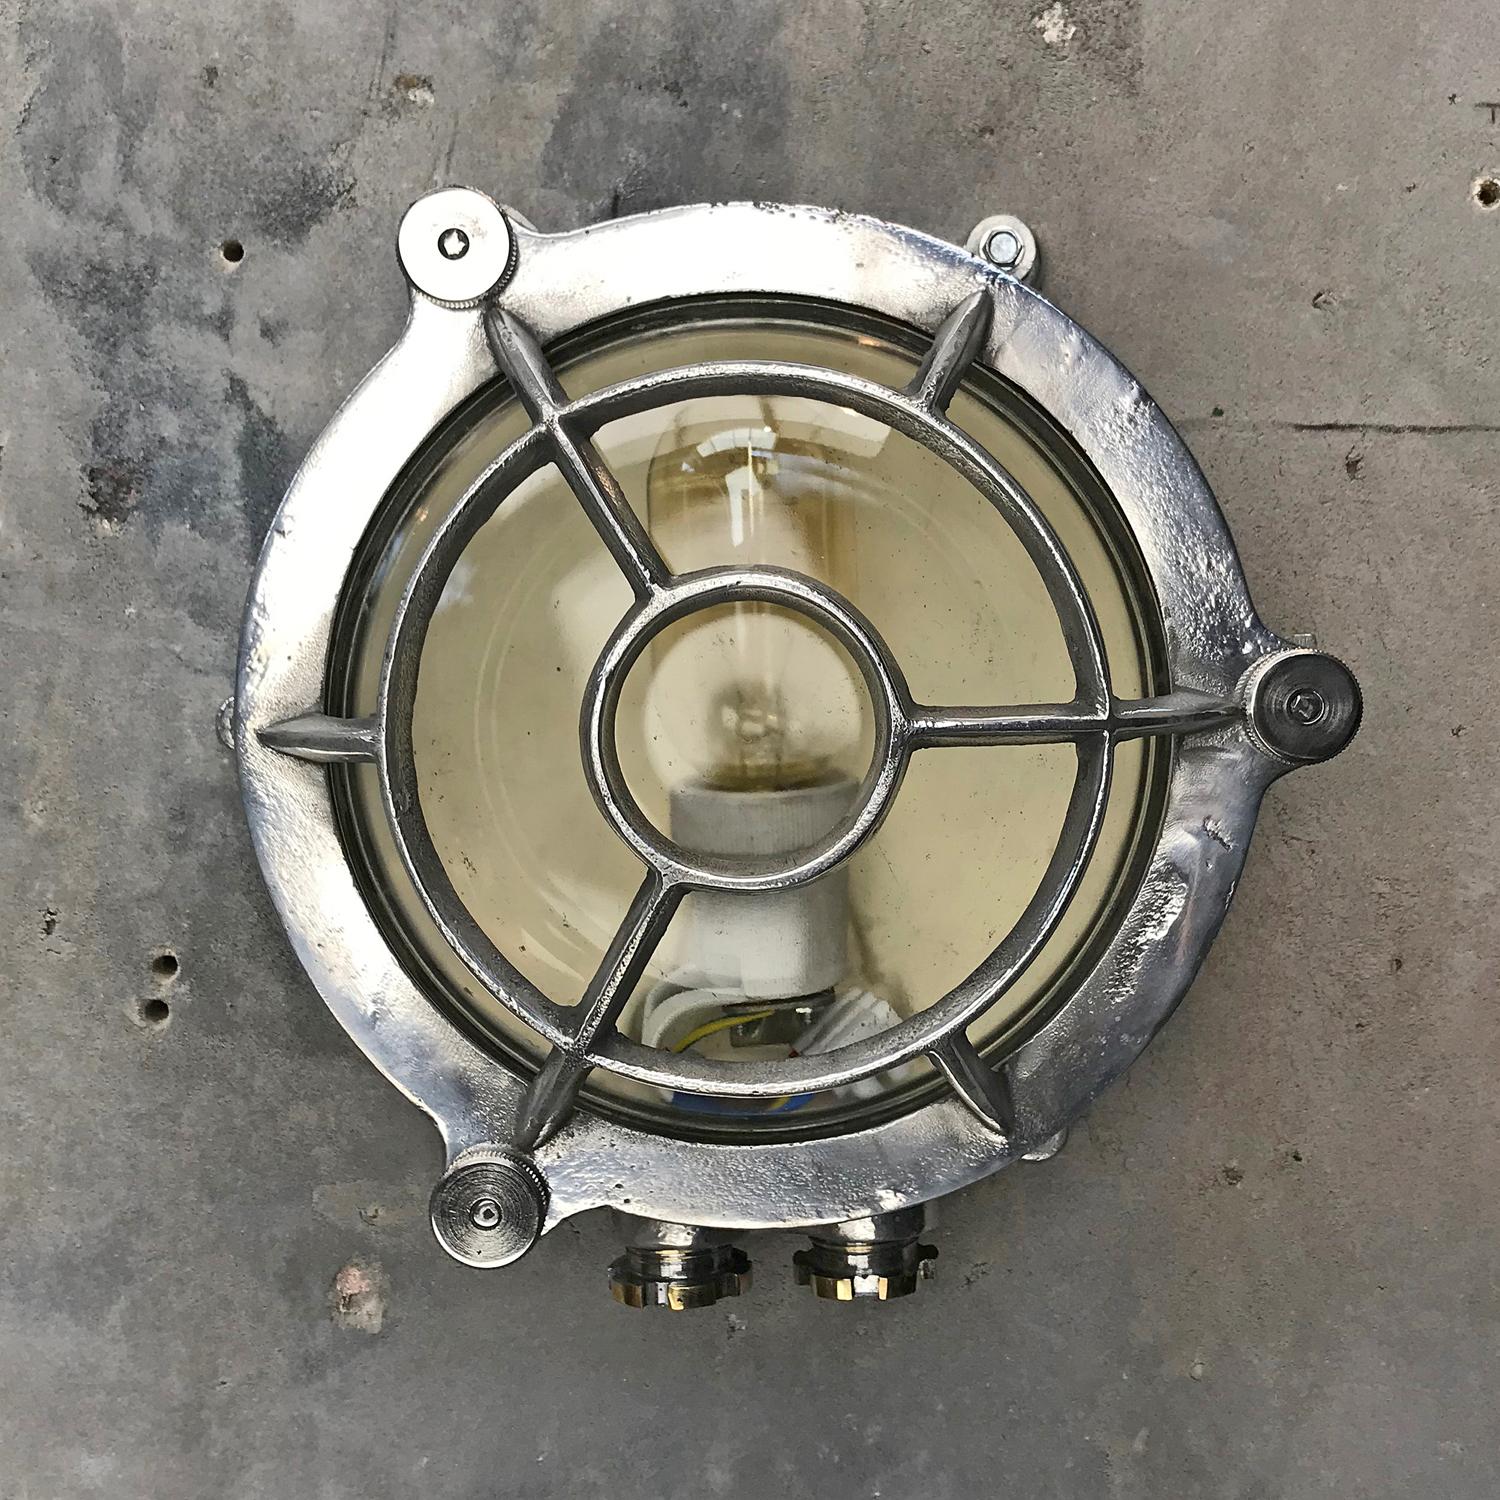 A classic maritime Industrial design, this type of aluminium circular bulkhead is found on ships passageways.

Solid cast aluminium construction with tempered glass dome, and fitted with CE certified ceramic E27 lamp